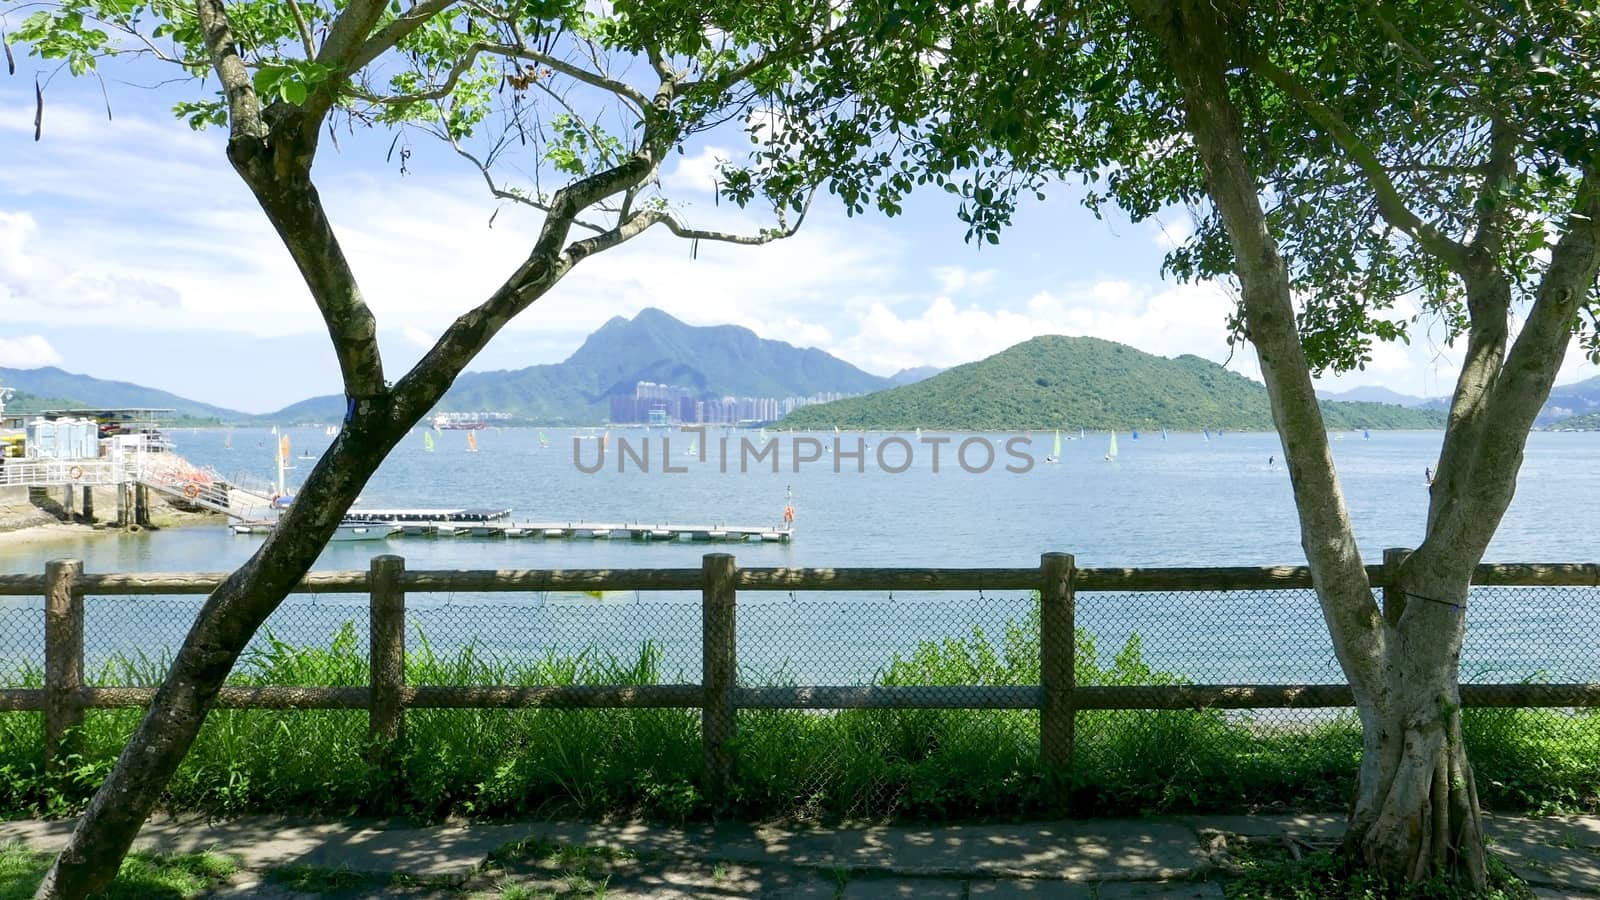 Outdoor wooden fence, mountain and watersport wind surfing in the sea